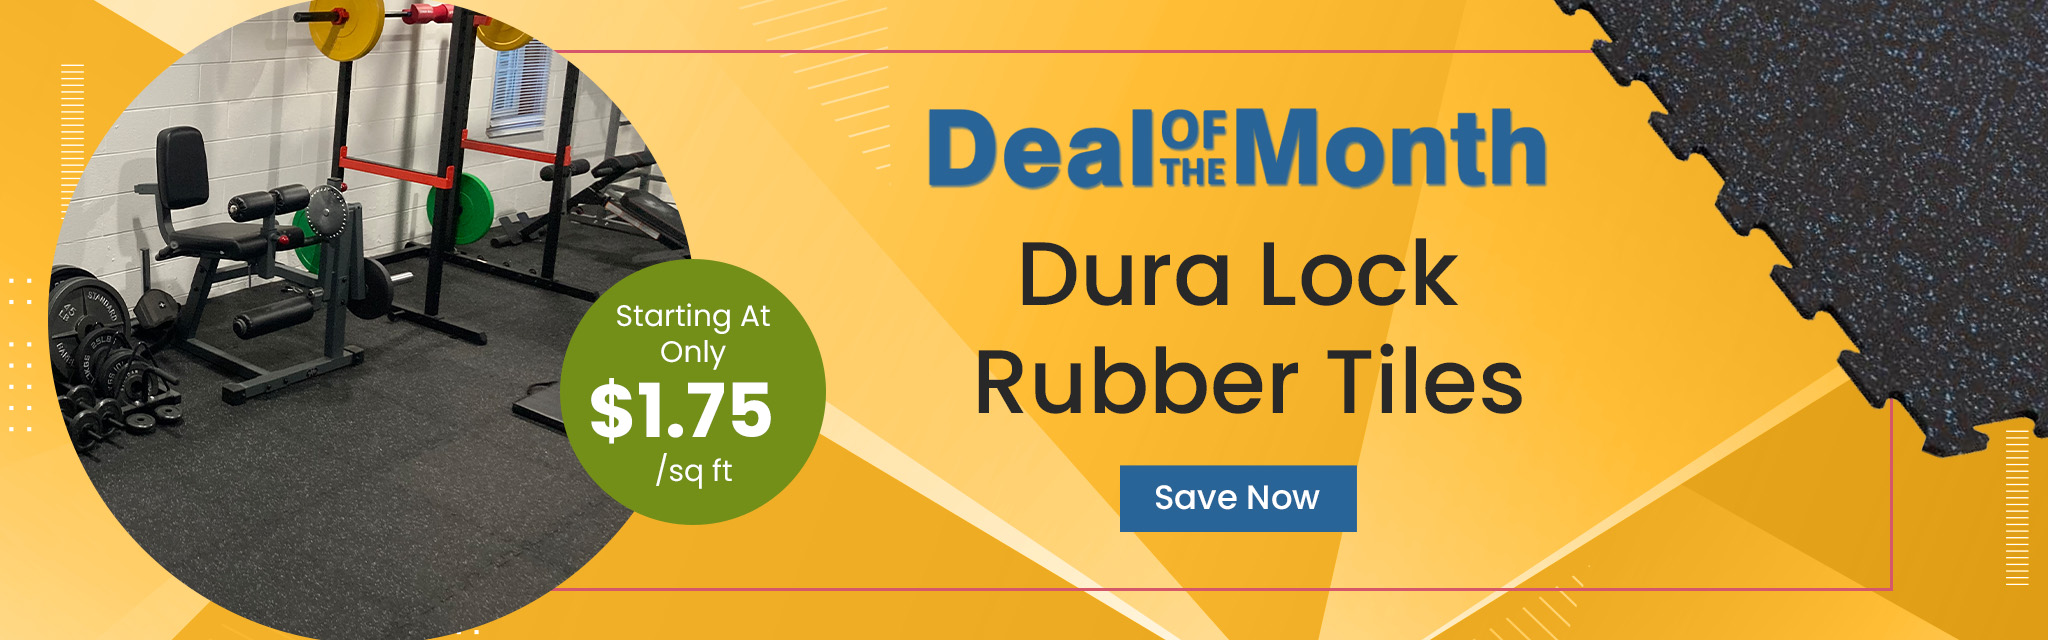 Deal Of The Month. Dura Lock Rubber Tiles. Staring At Only $1.75 per square feet. Save Now